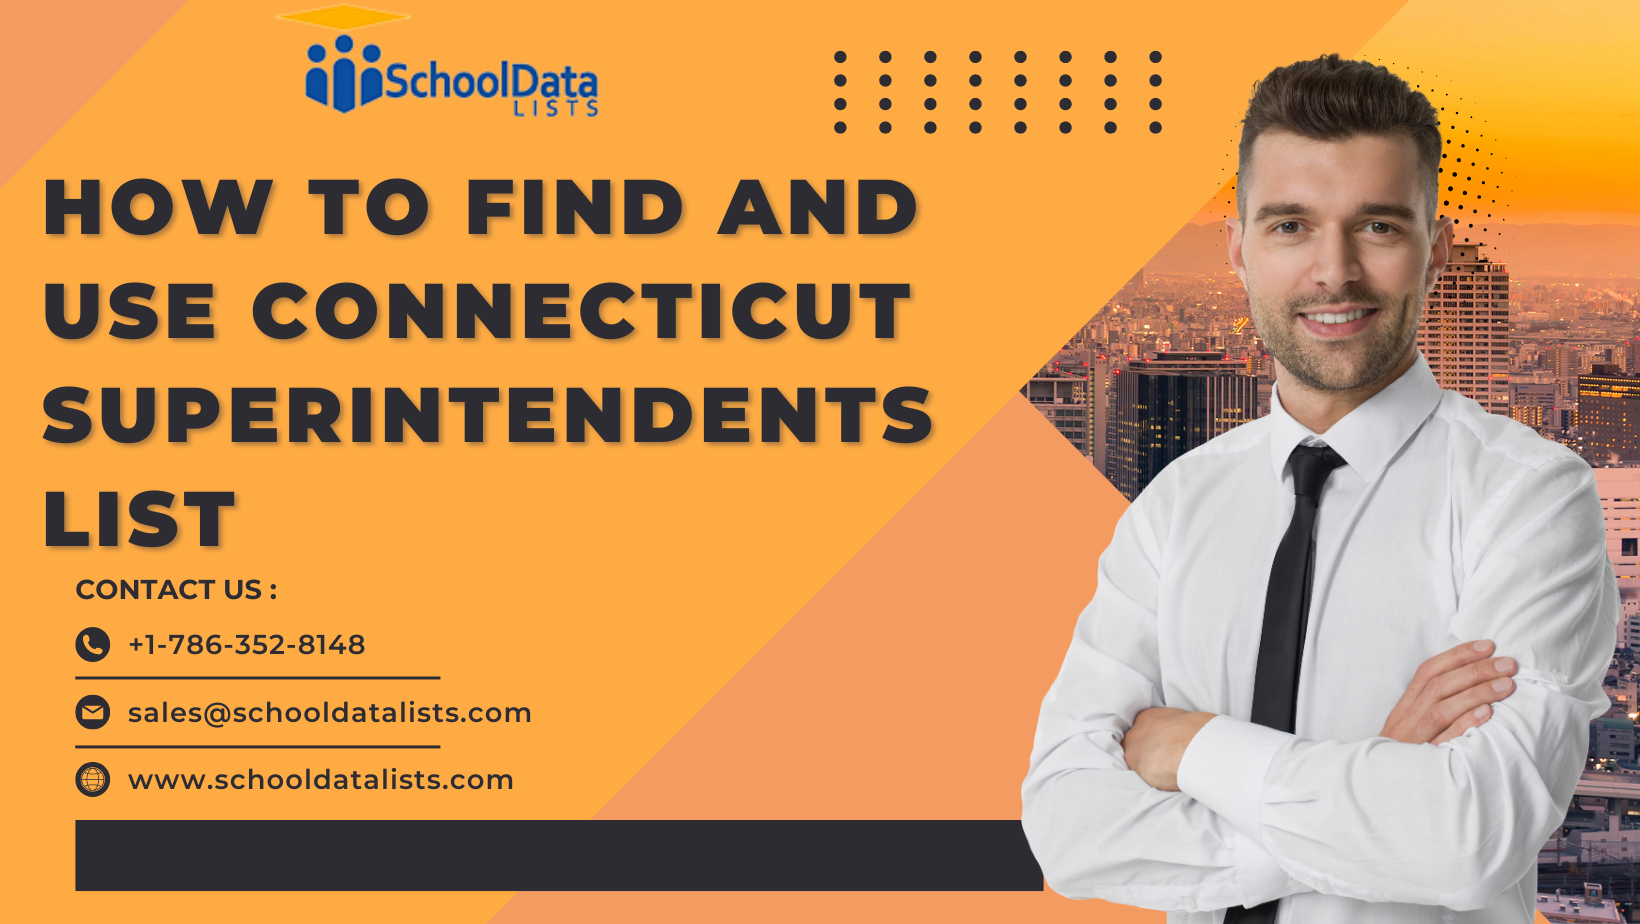 How to Find and Use Connecticut Superintendents List